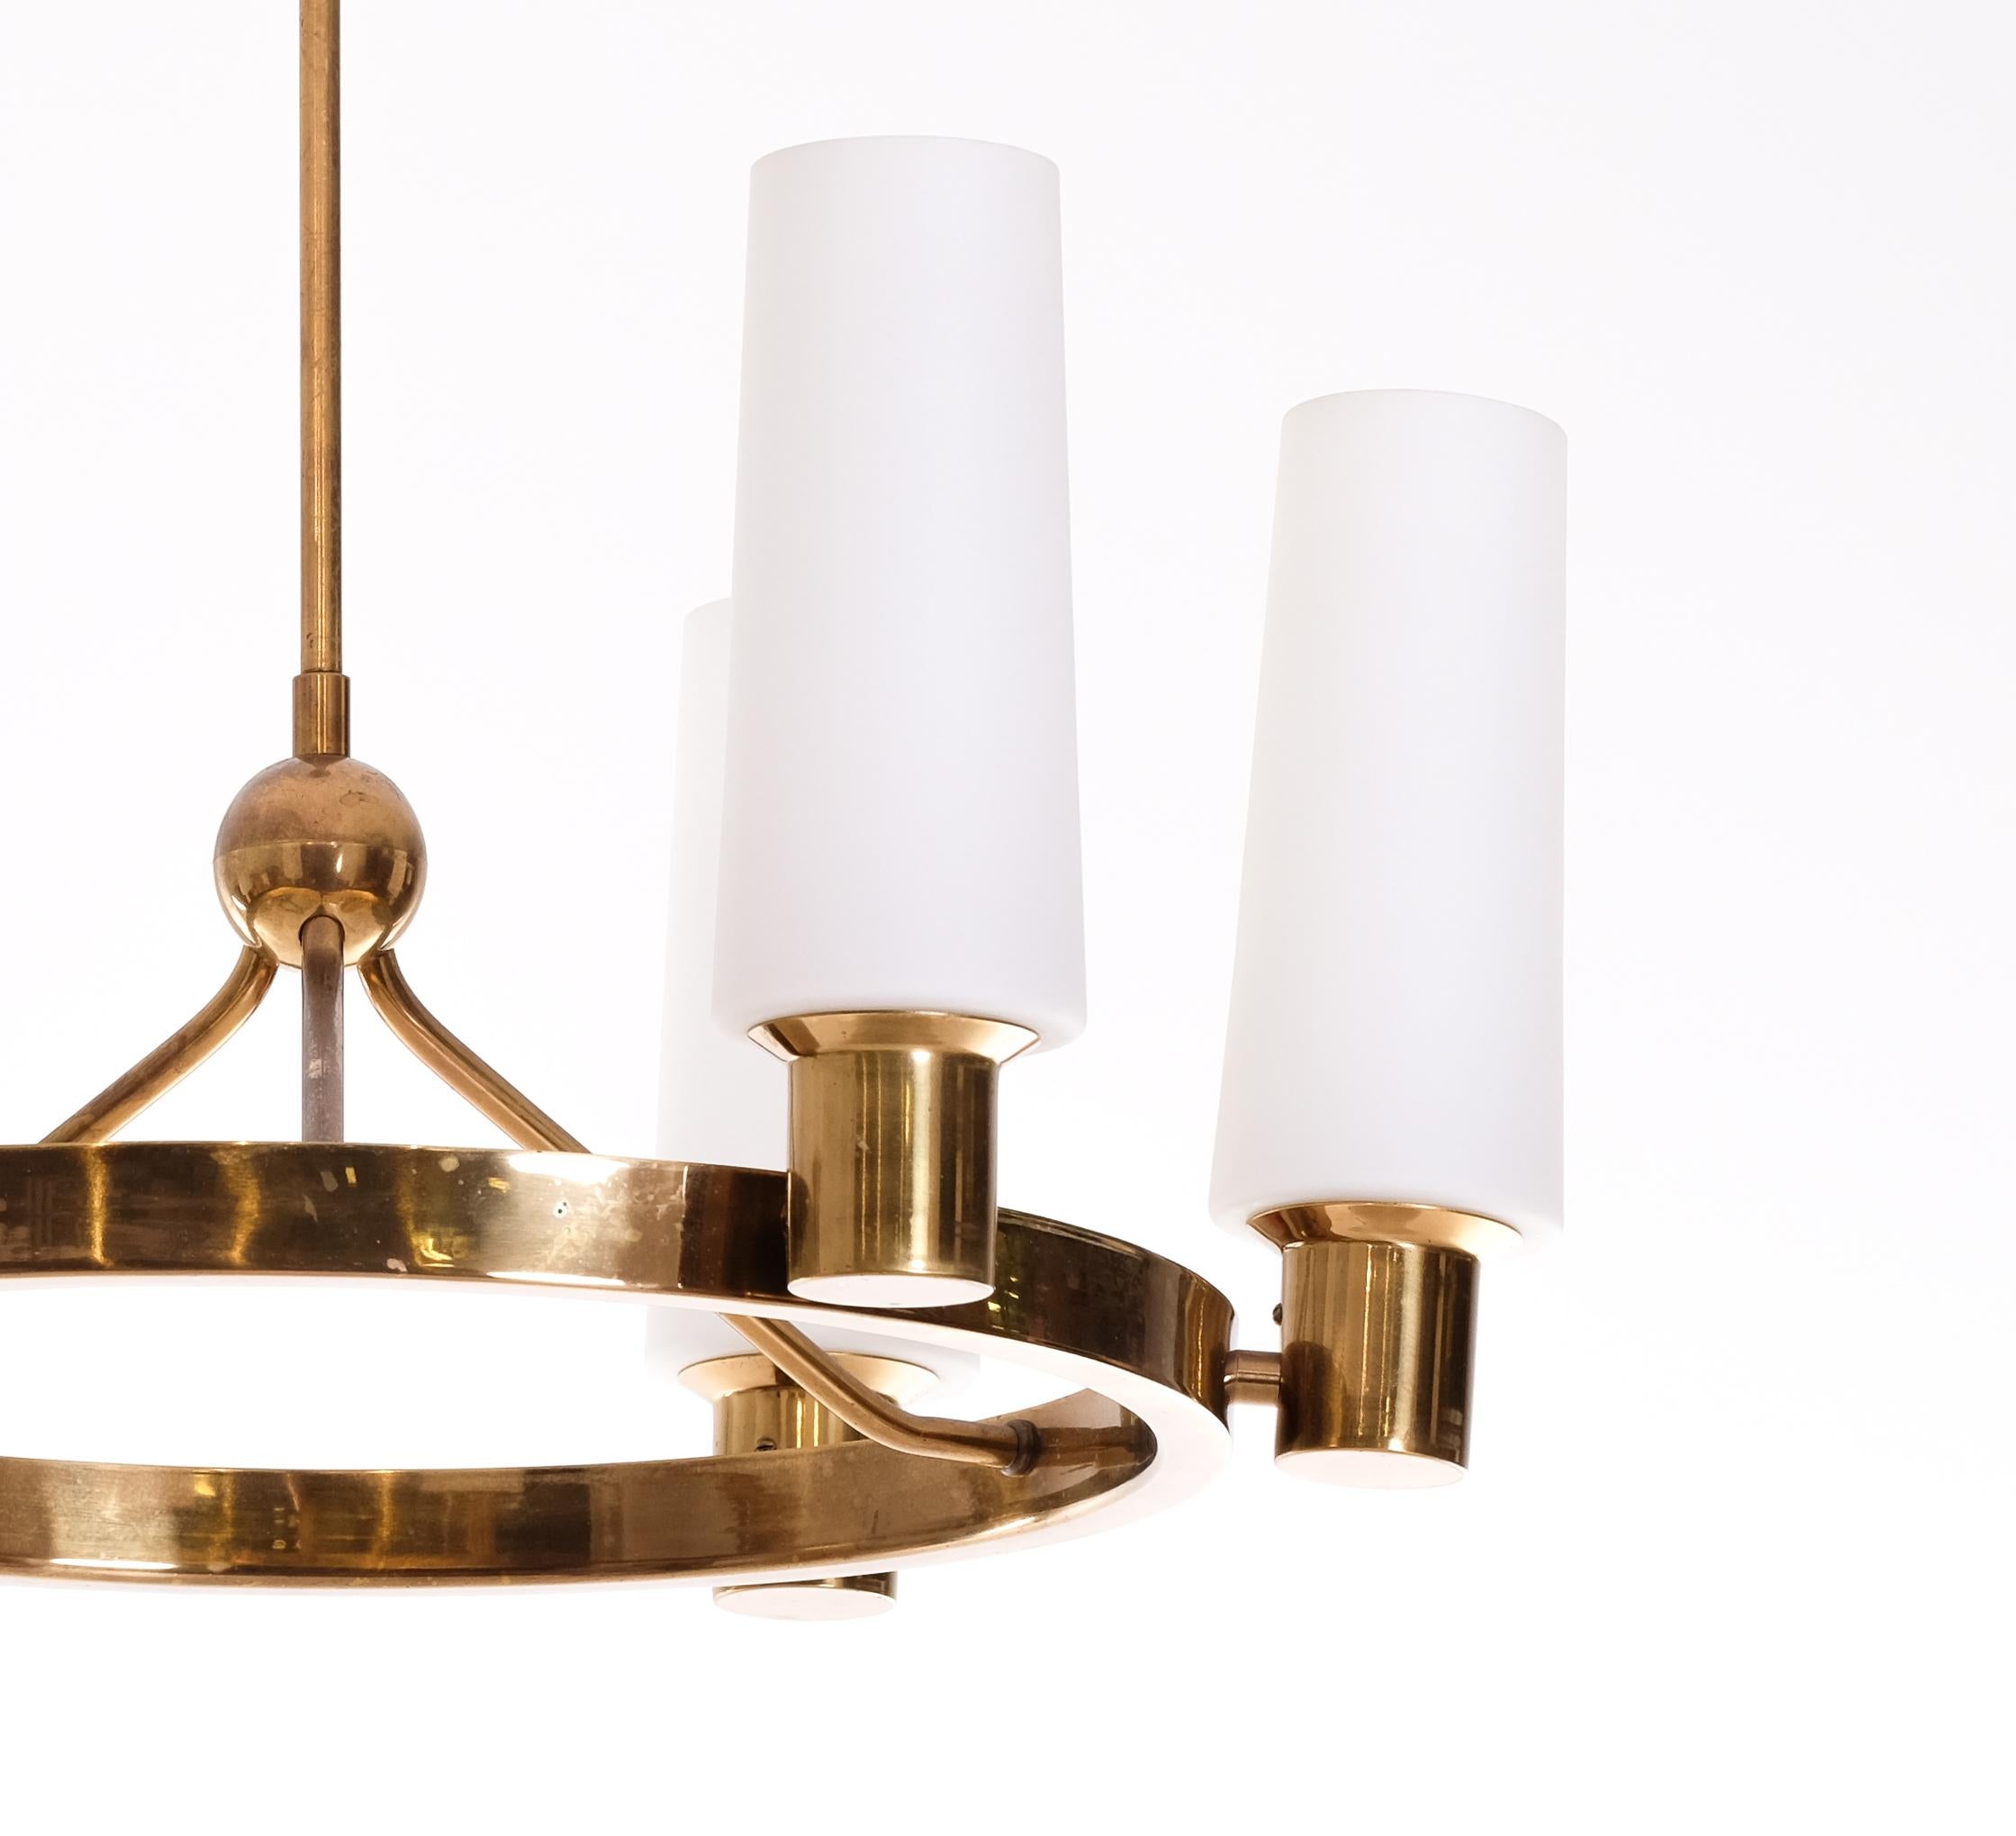 Rare set of 3 brass ceiling lights with opaline shades, produced by Böhlmarks, Sweden, 1950s.
The height is adjustable according to your preferences.  

Please note: Listed price is for one (1) chandelier. 

Measures: 
Height: 50 cm
Diameter: 58 cm.